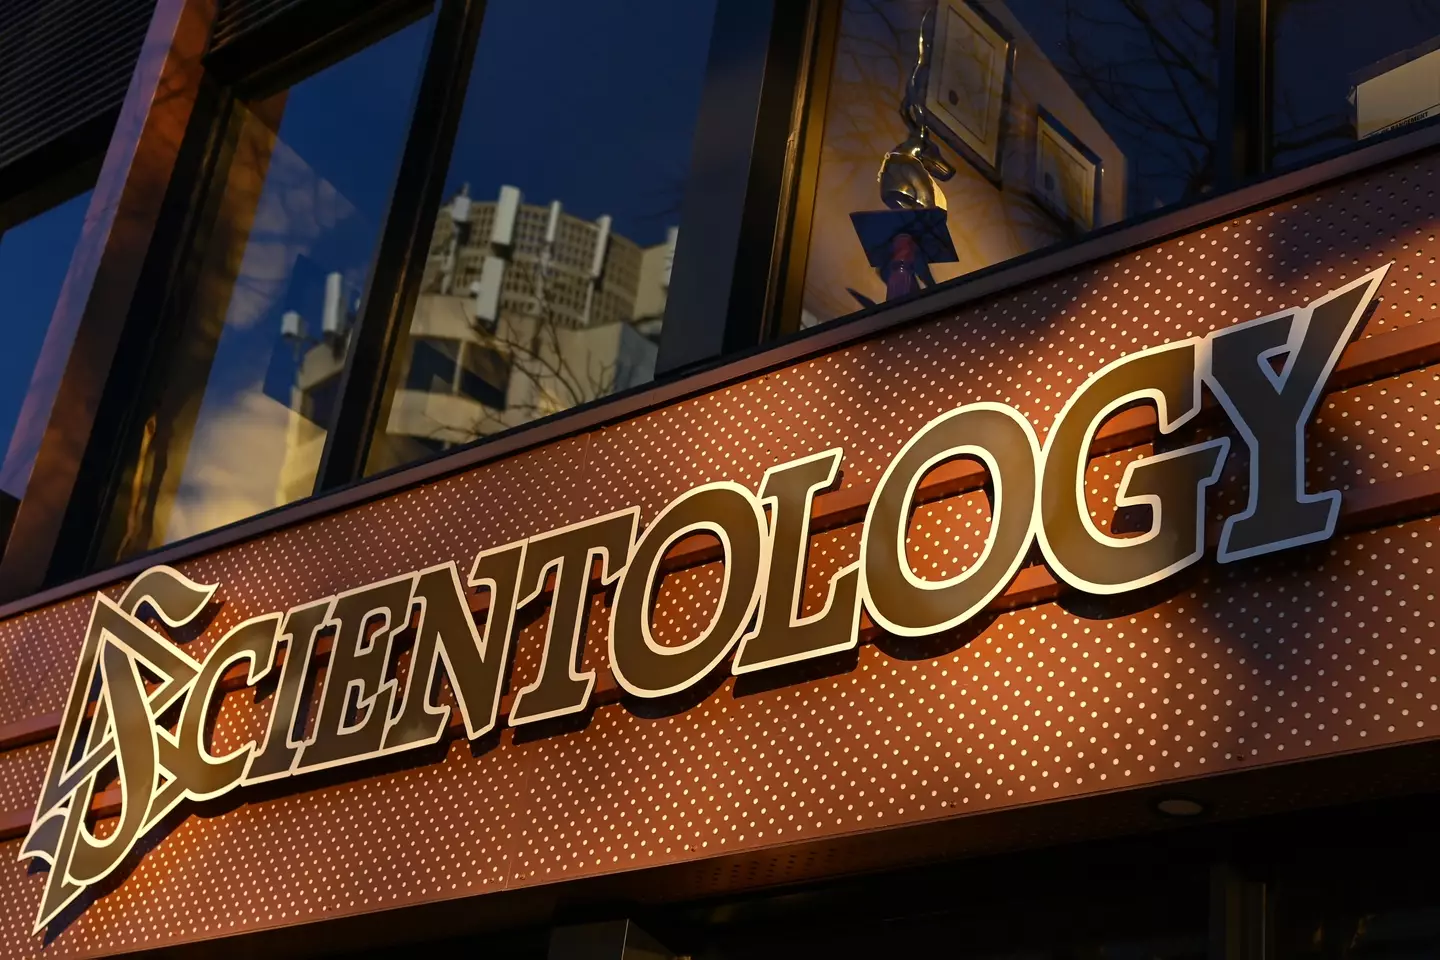 The Church of Scientology has described Remini's claims as 'lunacy'.